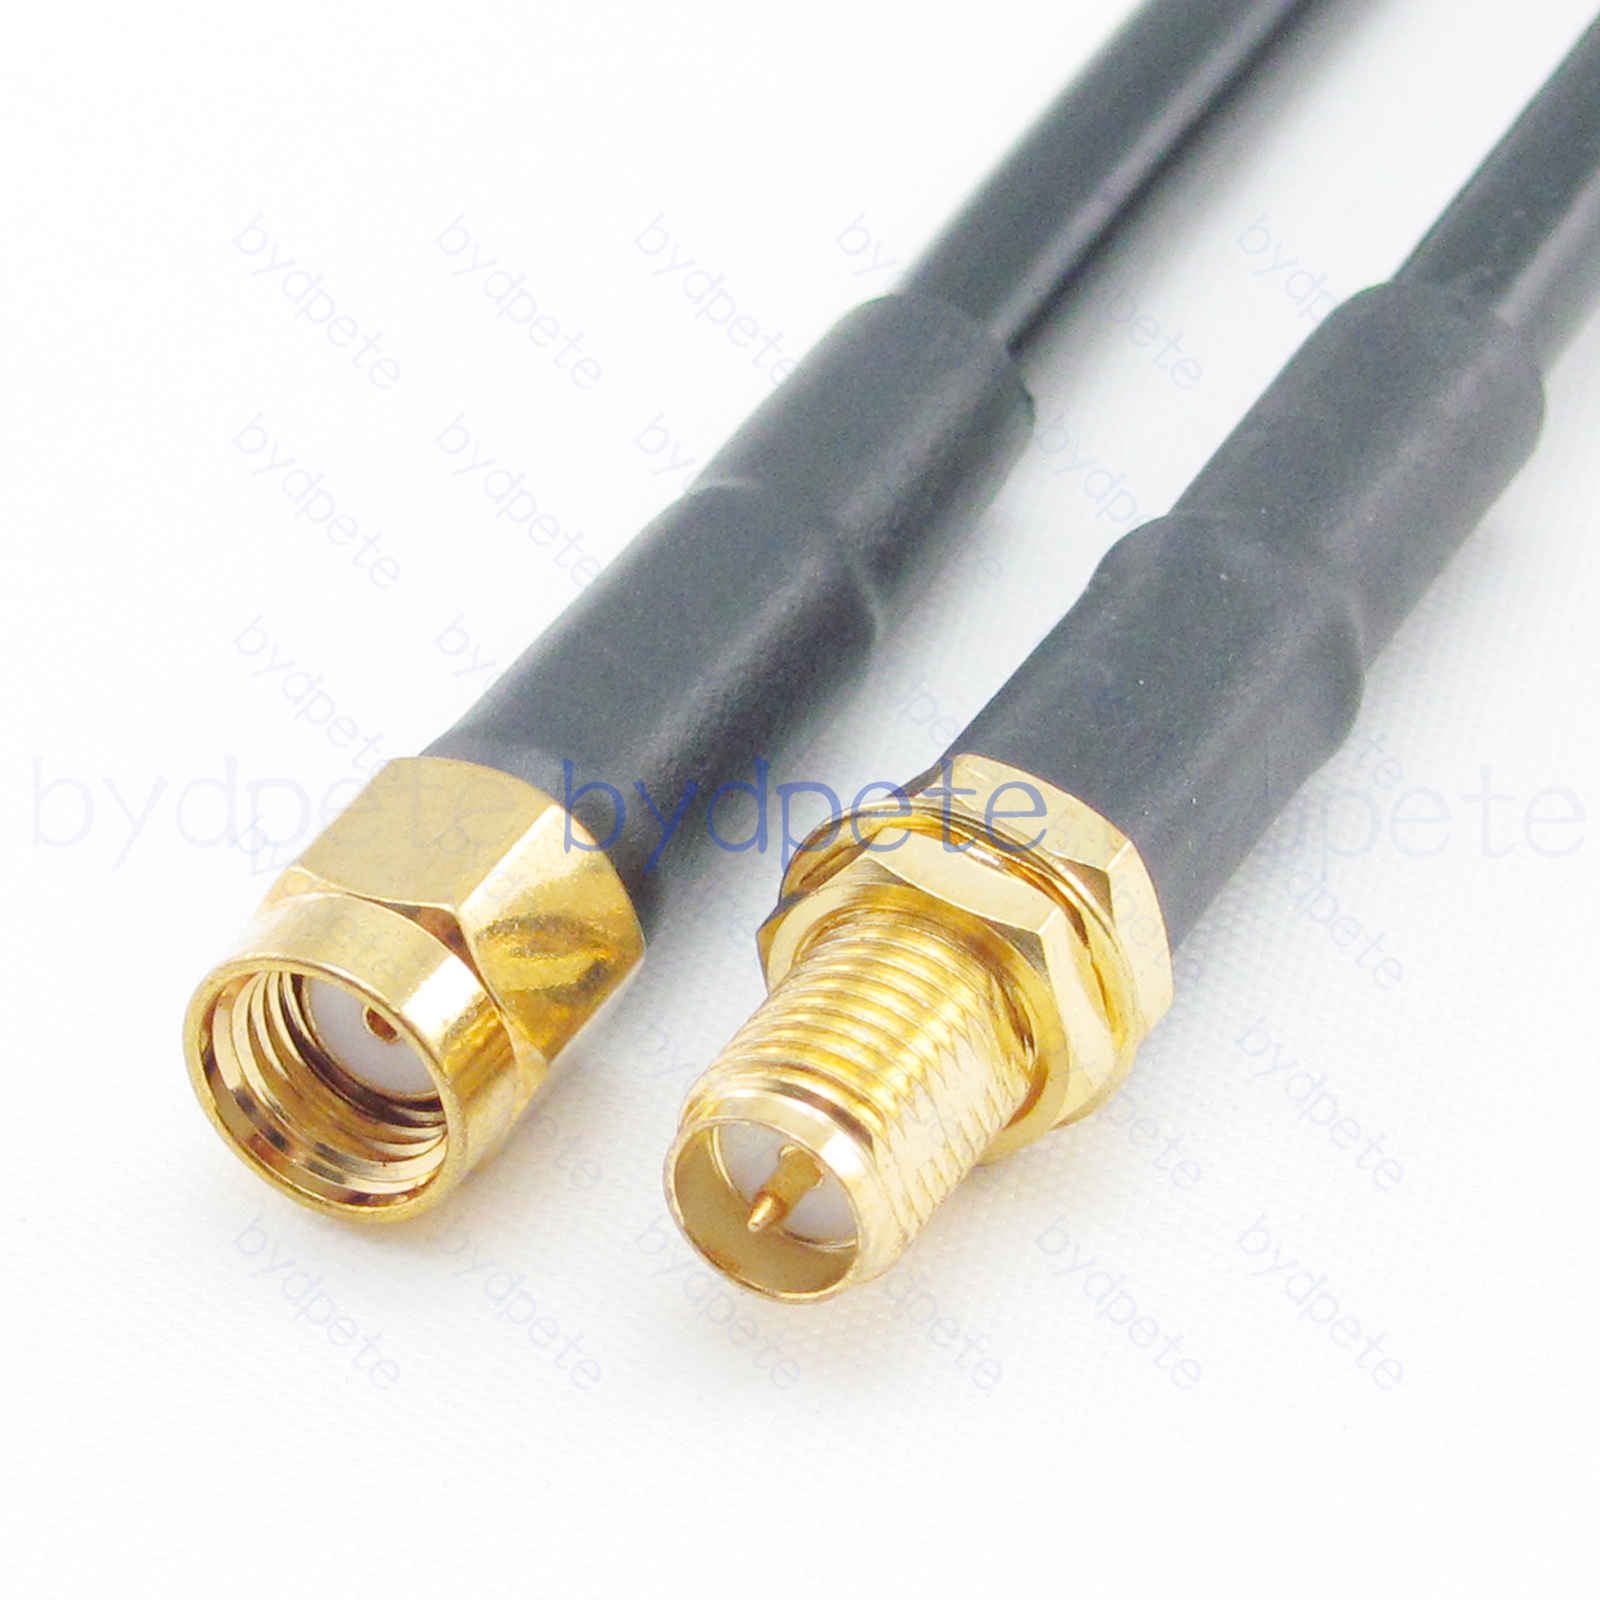 RP-SMA Male to RP-SMA Female RG58 Coaxial Cable Koaxial Kable 50Ohm extension lot bydpete BYDC020SMA58